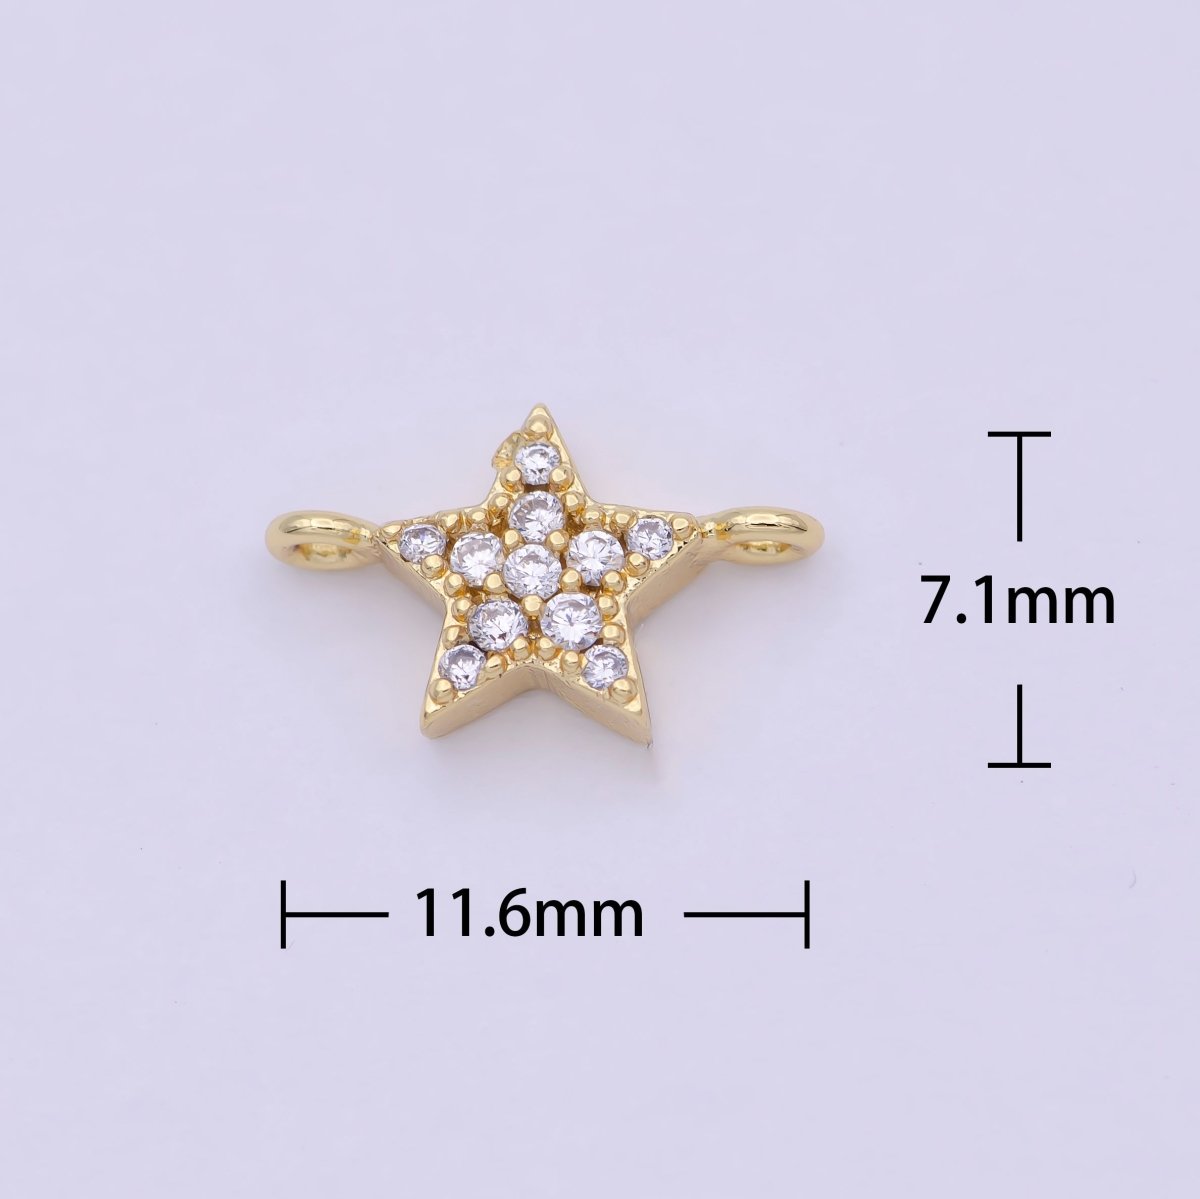 Mini 14k Gold Filled Heart, Star Charm Connector for Bracelet Necklace Earring Link Connector Supply F-001 F-003 - DLUXCA